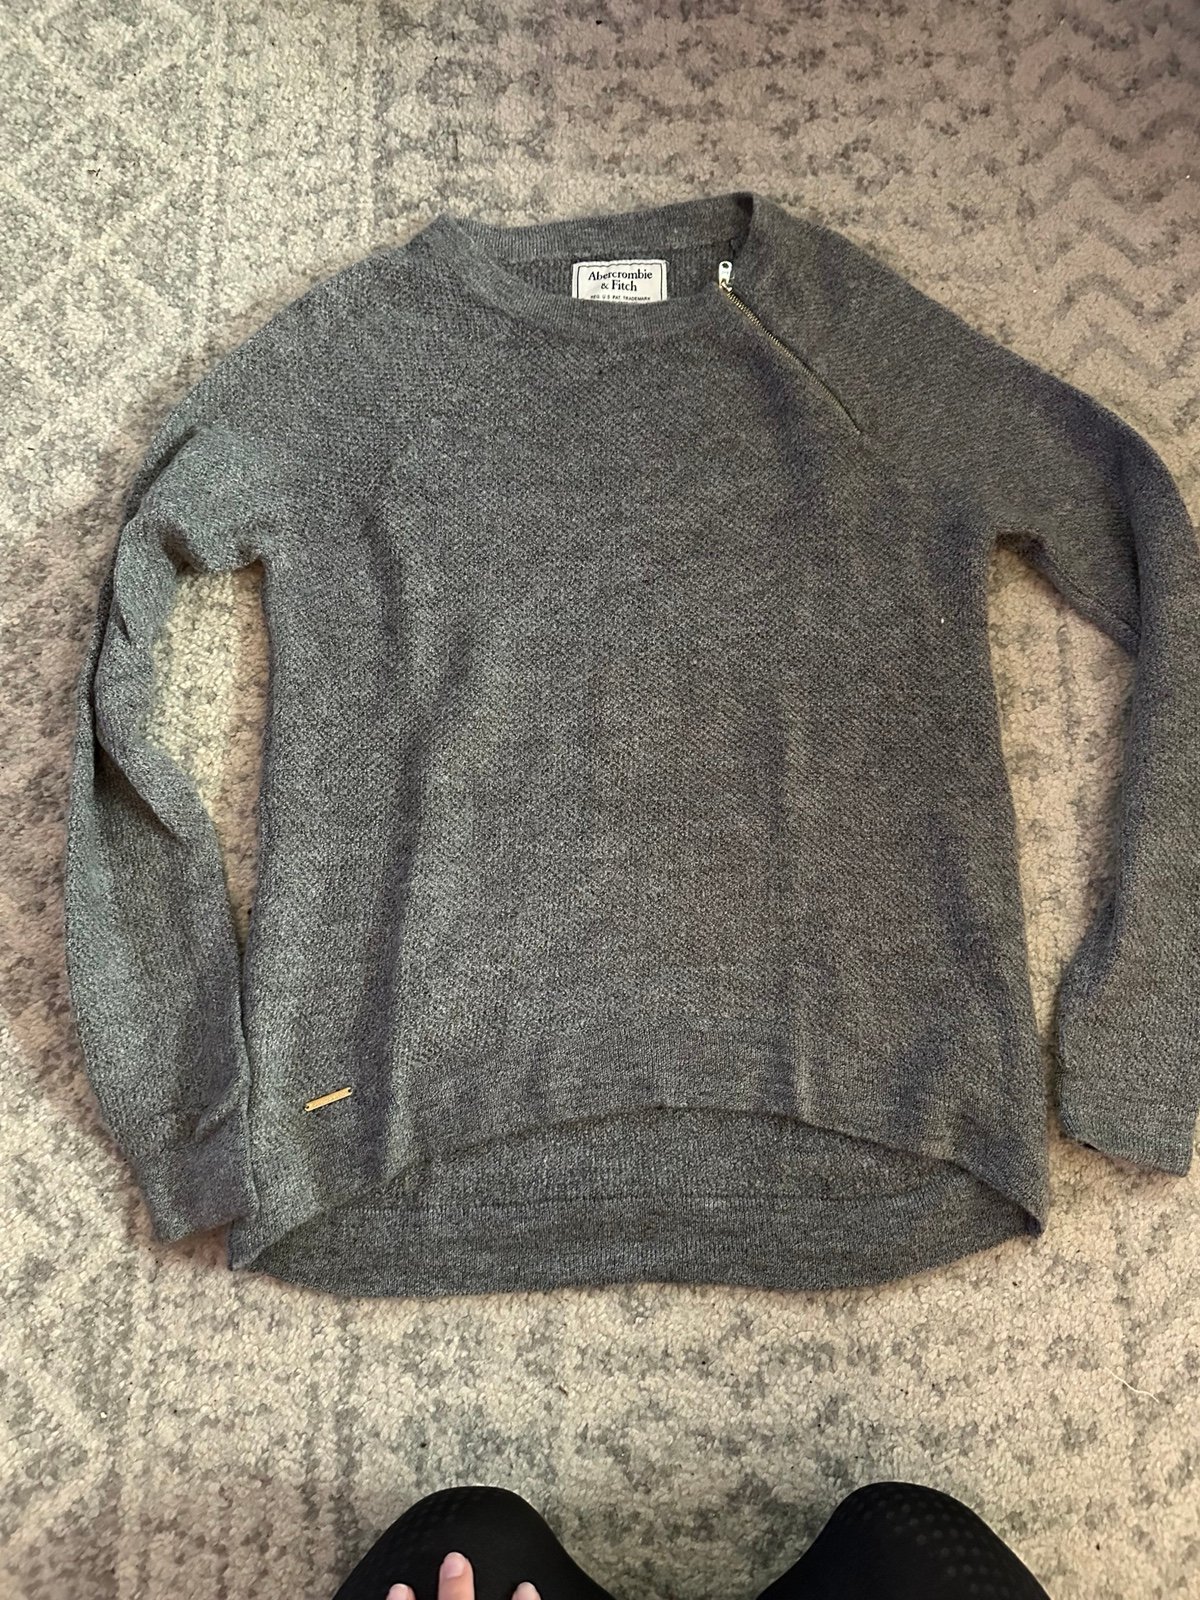 Simple Abercrombie gray knit sweater with zip detail p1